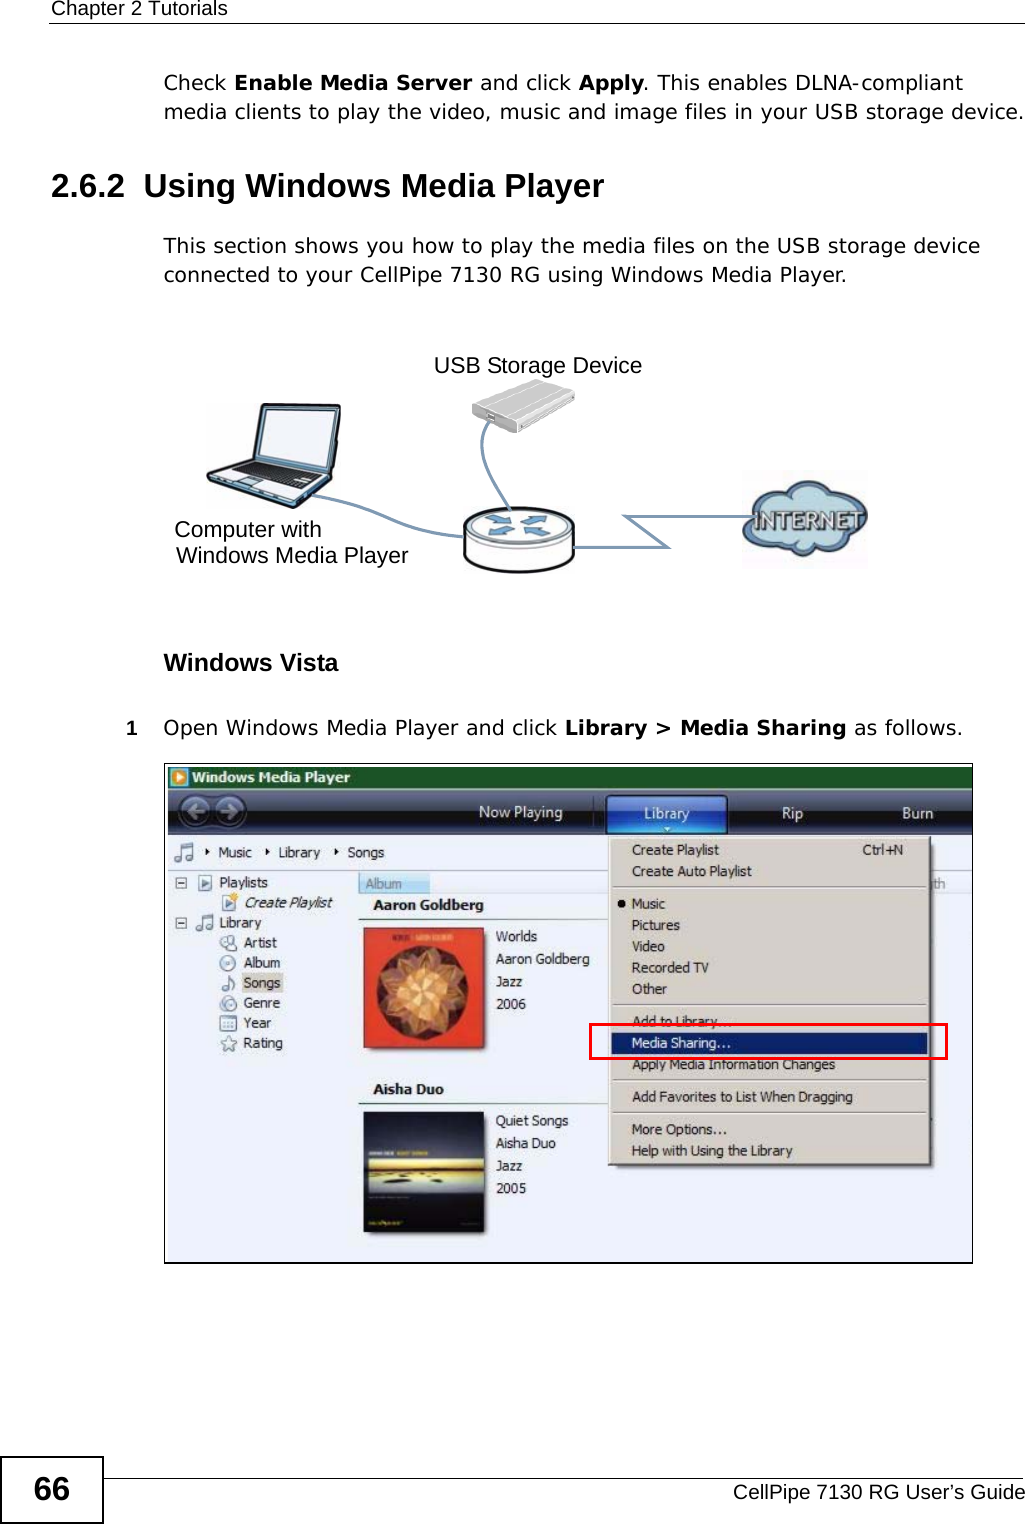 Chapter 2 TutorialsCellPipe 7130 RG User’s Guide66Check Enable Media Server and click Apply. This enables DLNA-compliant media clients to play the video, music and image files in your USB storage device.2.6.2  Using Windows Media PlayerThis section shows you how to play the media files on the USB storage device connected to your CellPipe 7130 RG using Windows Media Player. Tutorial: Media Server Setup (Using Windows Media Player)Windows Vista1Open Windows Media Player and click Library &gt; Media Sharing as follows.Tutorial: Media Sharing using Windows VistaComputer withUSB Storage DeviceWindows Media Player